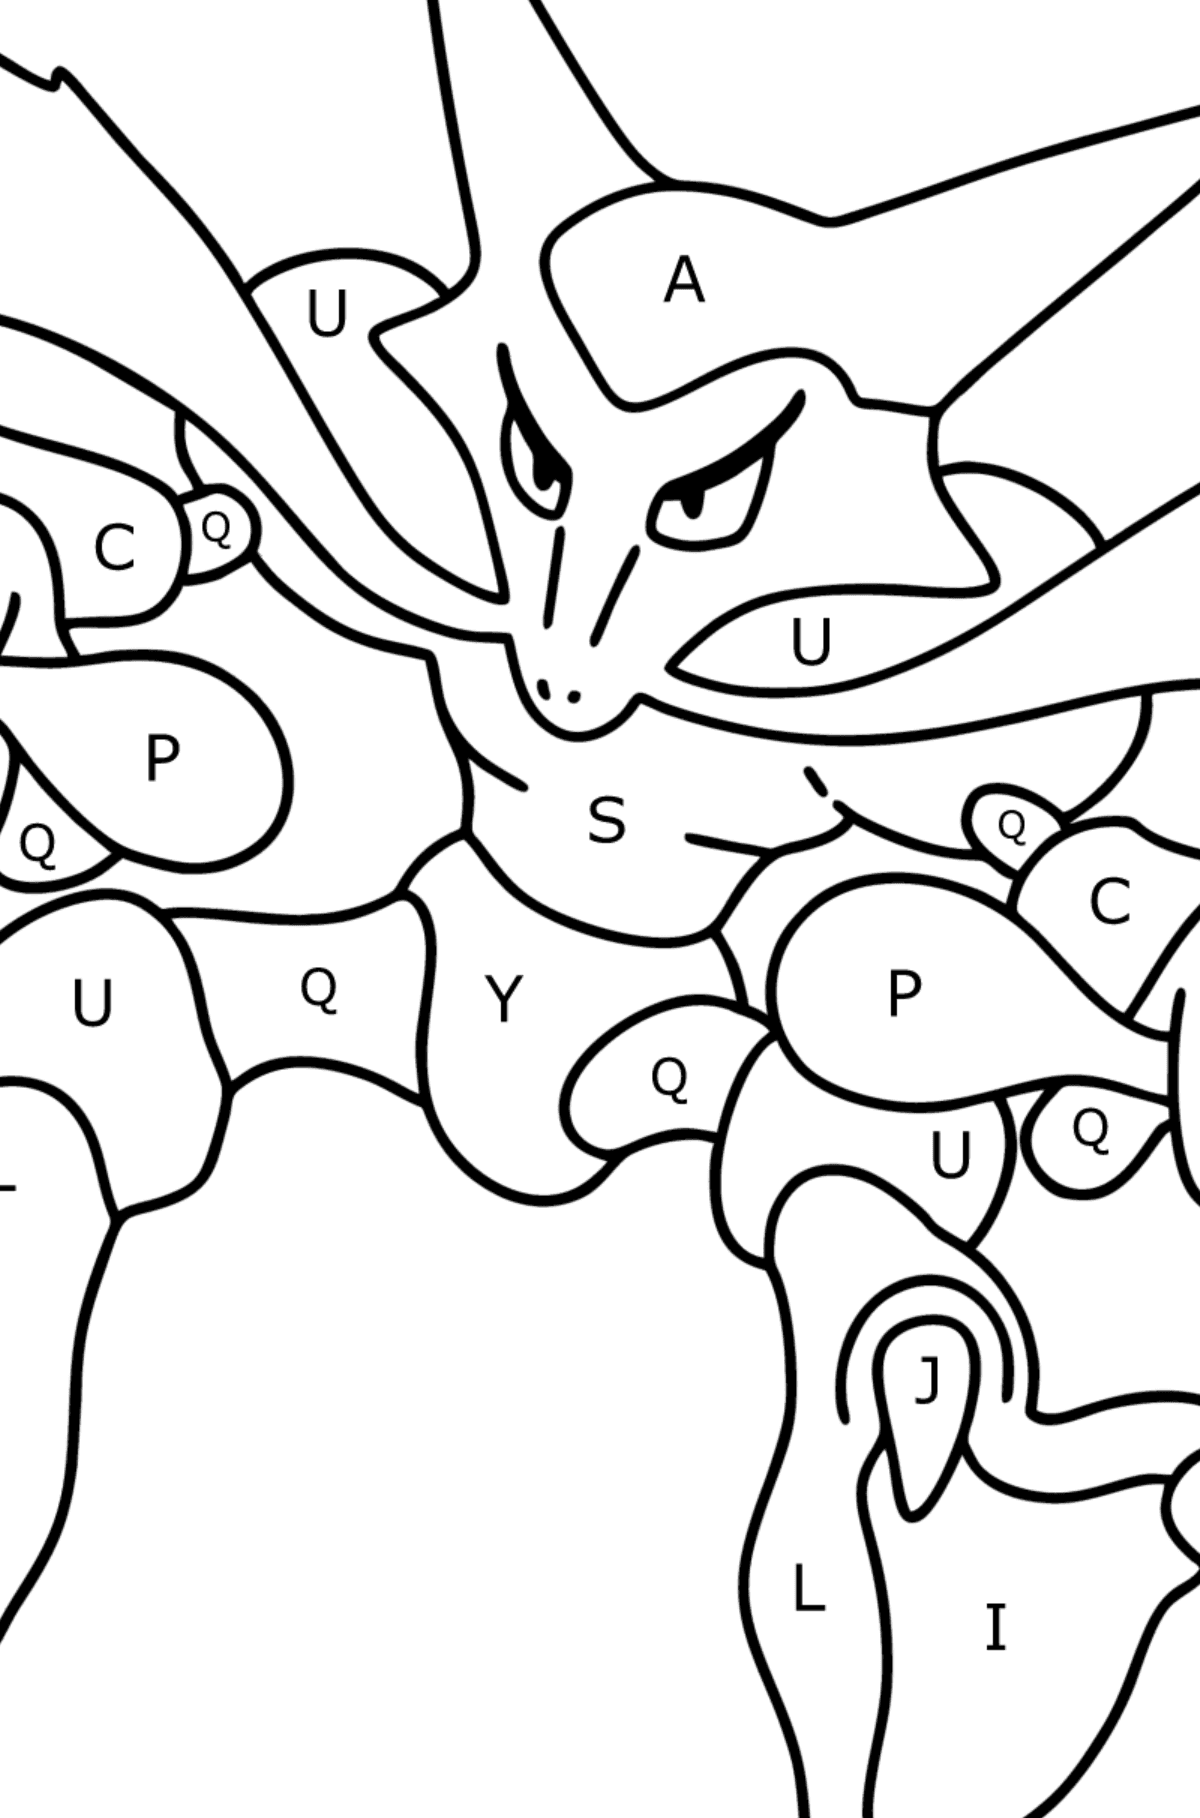 Coloring page Pokemon Go Alakazam - Coloring by Letters for Kids